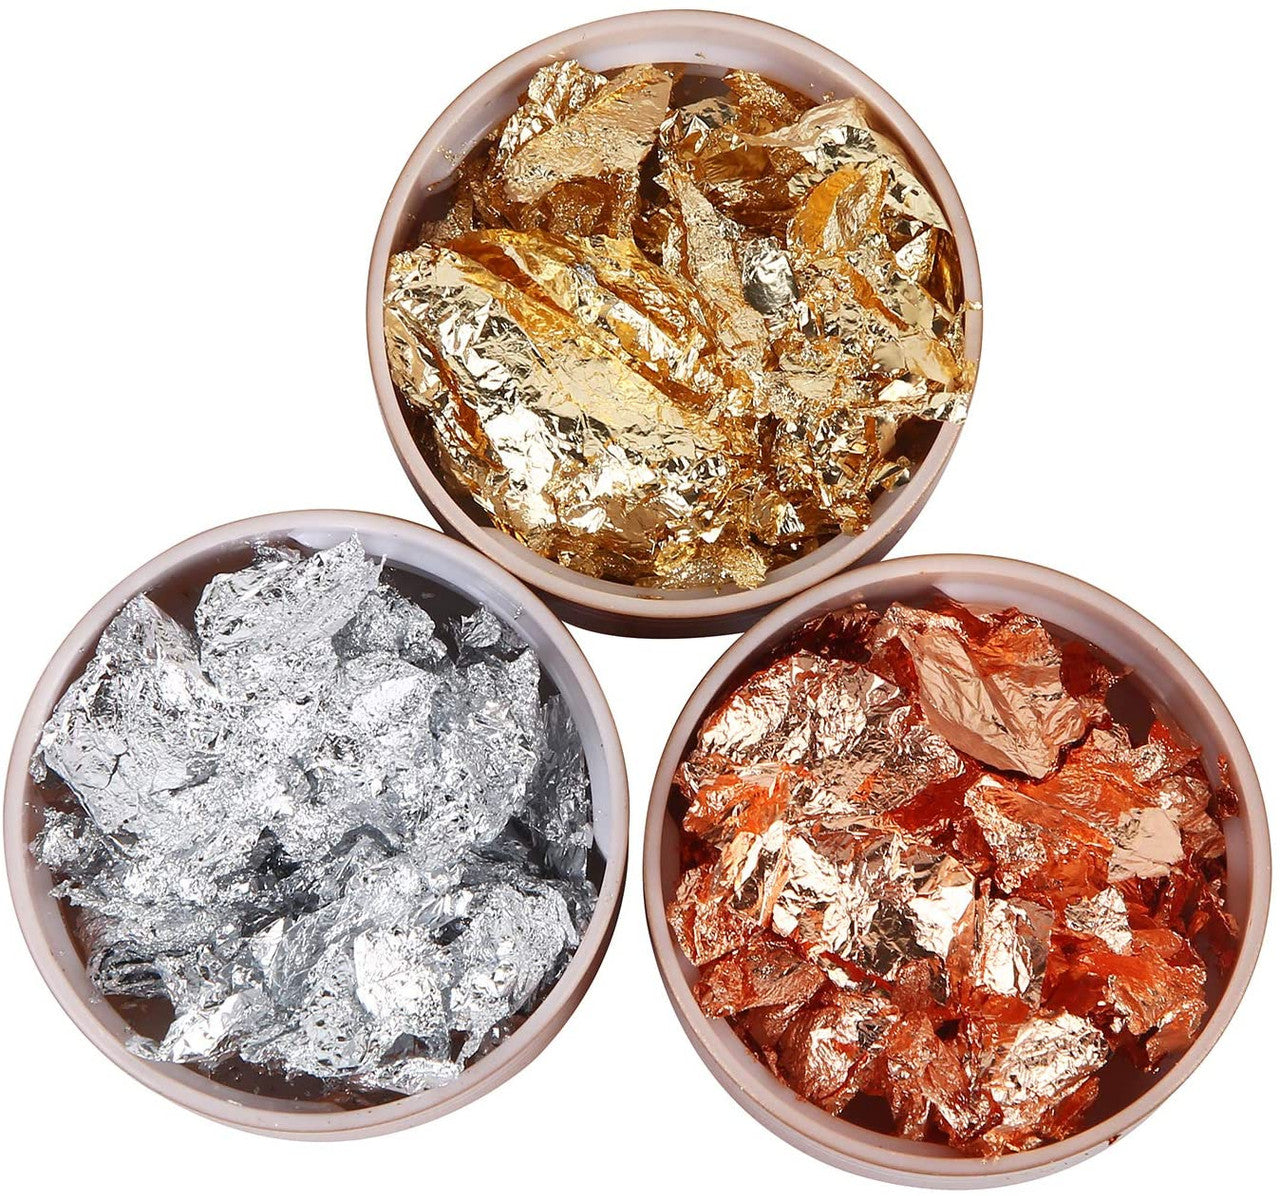 Premium Metallic Flakes for Epoxy Resin Art Projects Crafts Jewelry - Copper Silver Gold